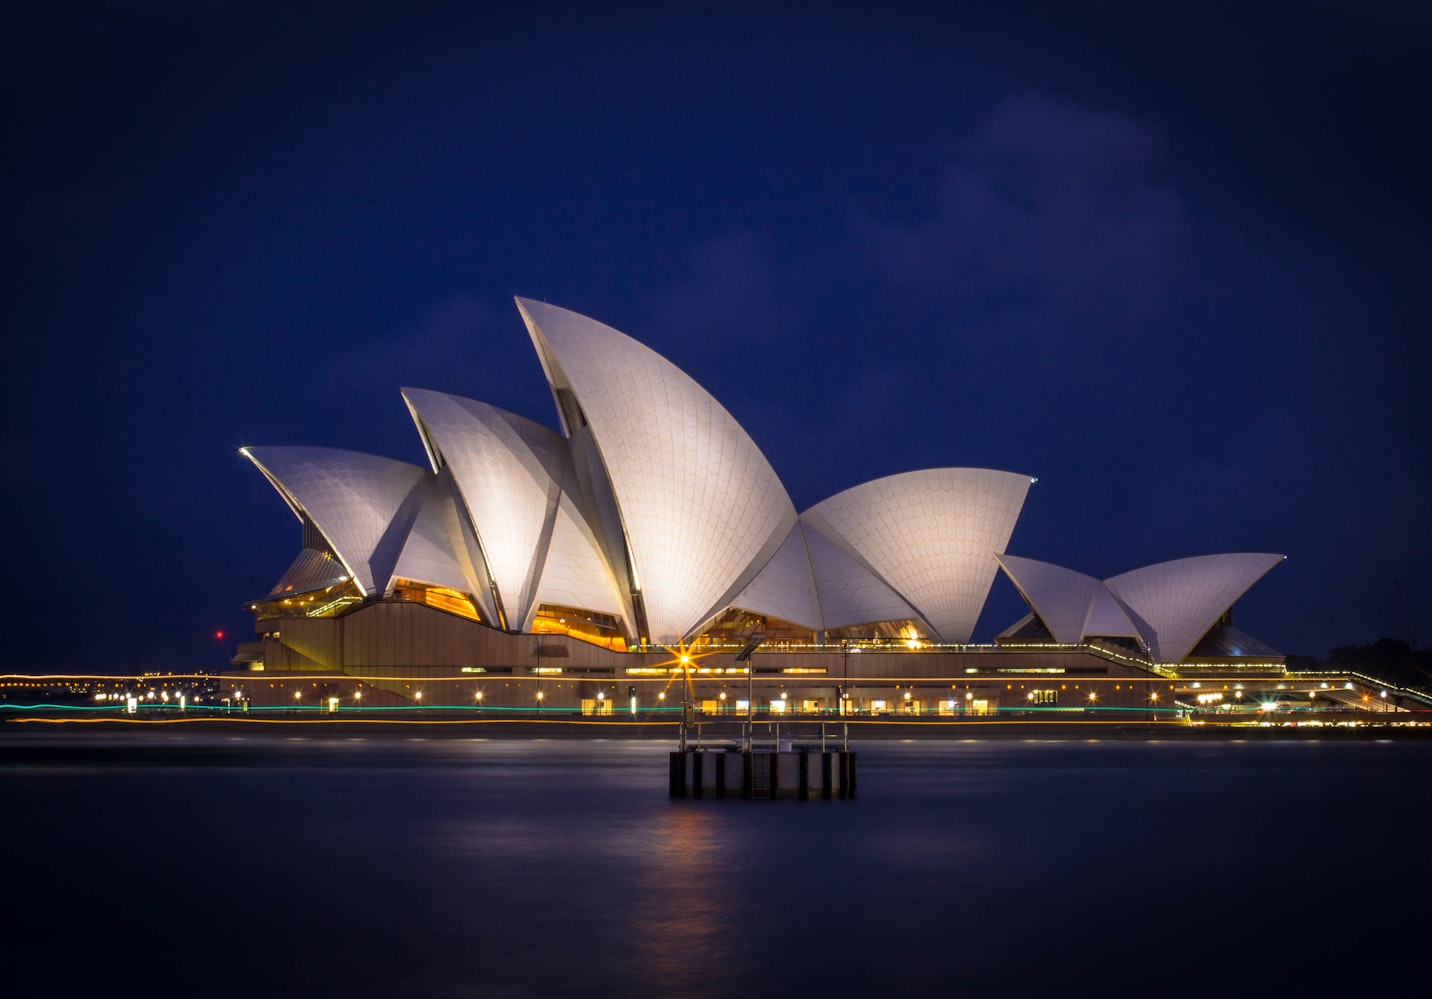 The Sydney Opera House was not designed by an architect